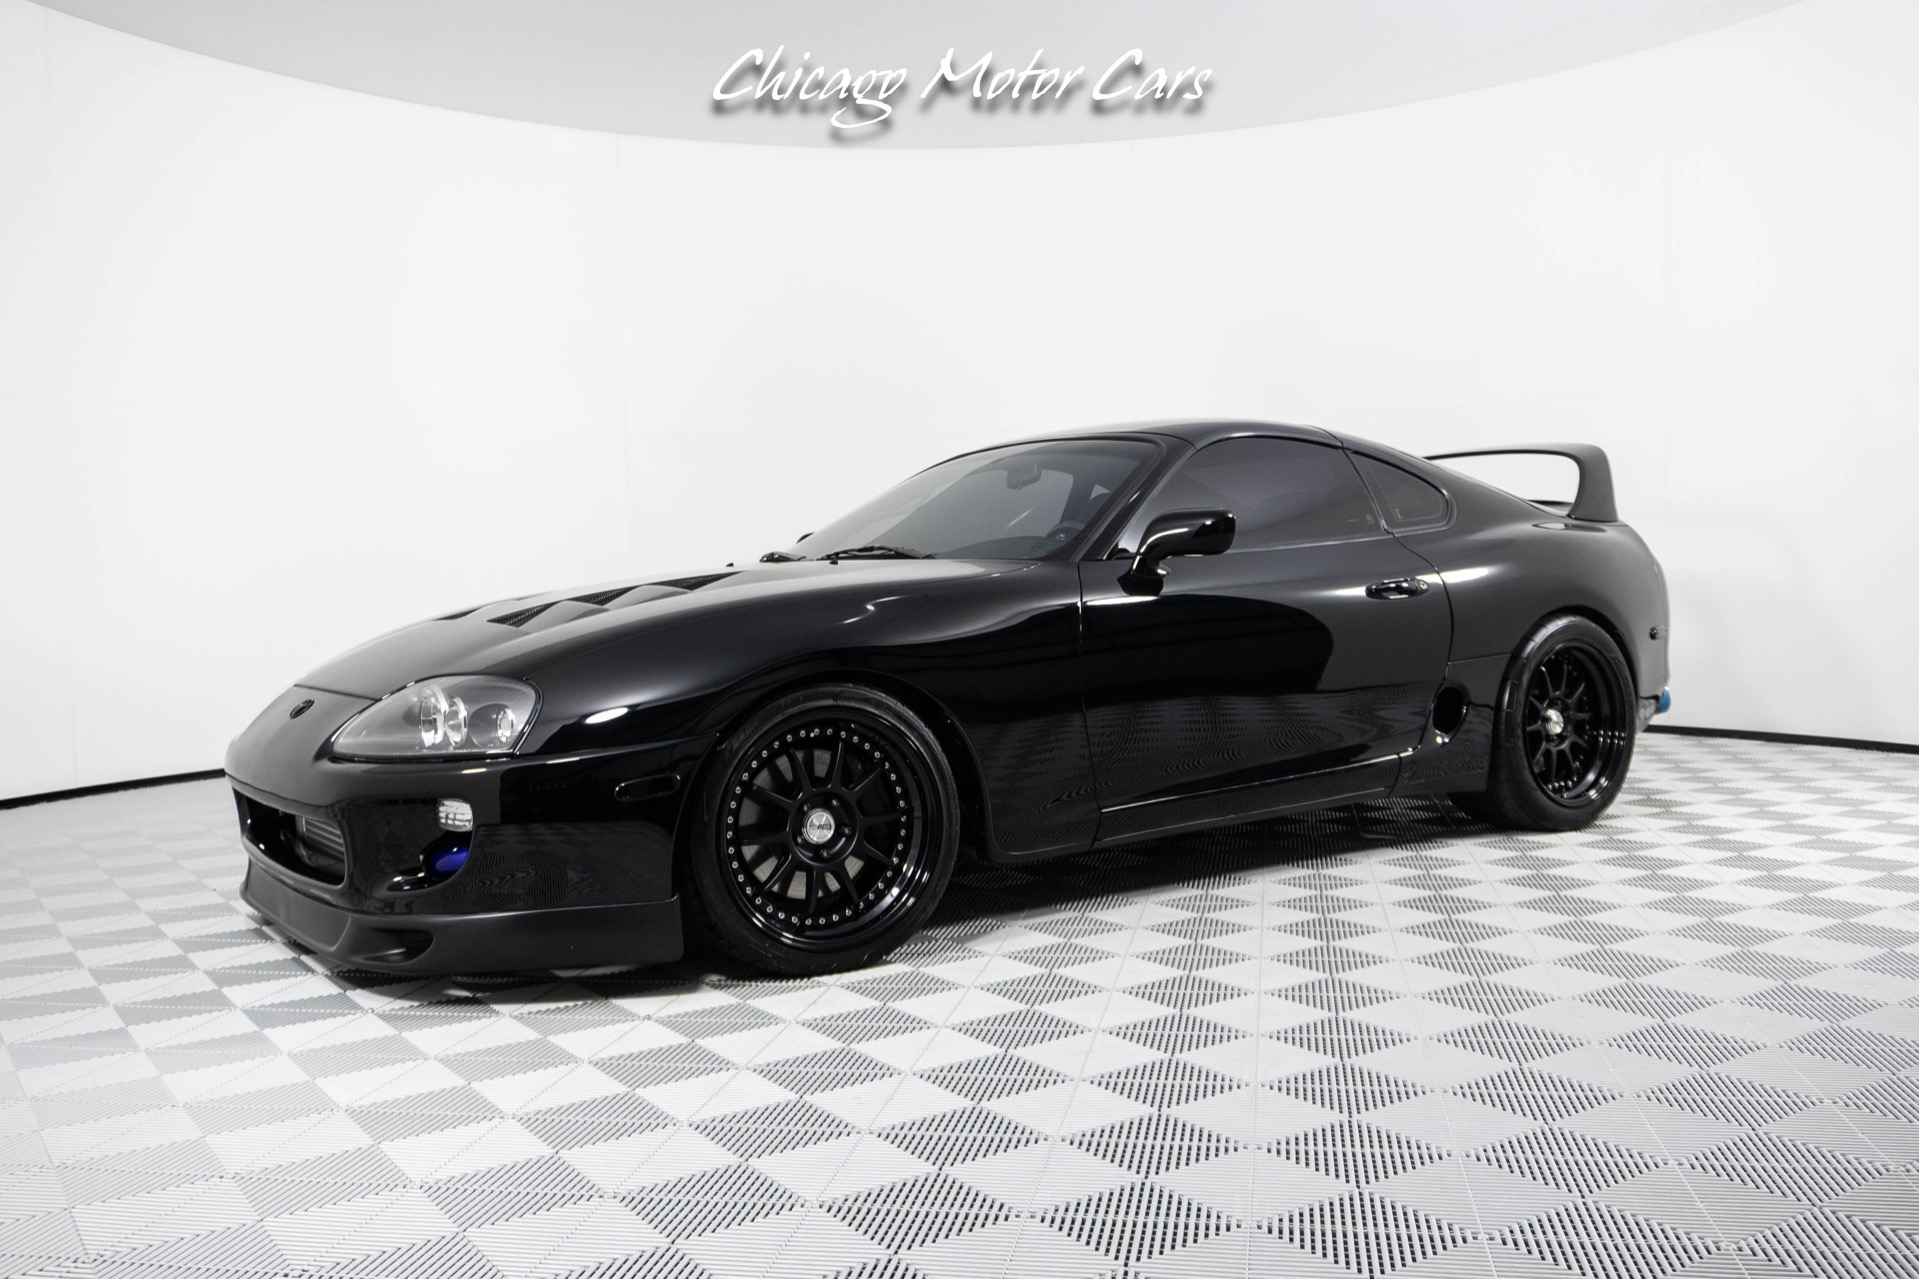 https://www.chicagomotorcars.com/imagetag/10909/main/l/Used-1993-Toyota-Supra-Mk4-6-Spd-1000-WHP-Real-St-Performance-Built-OVER-113K-in-UPGRADES.jpg